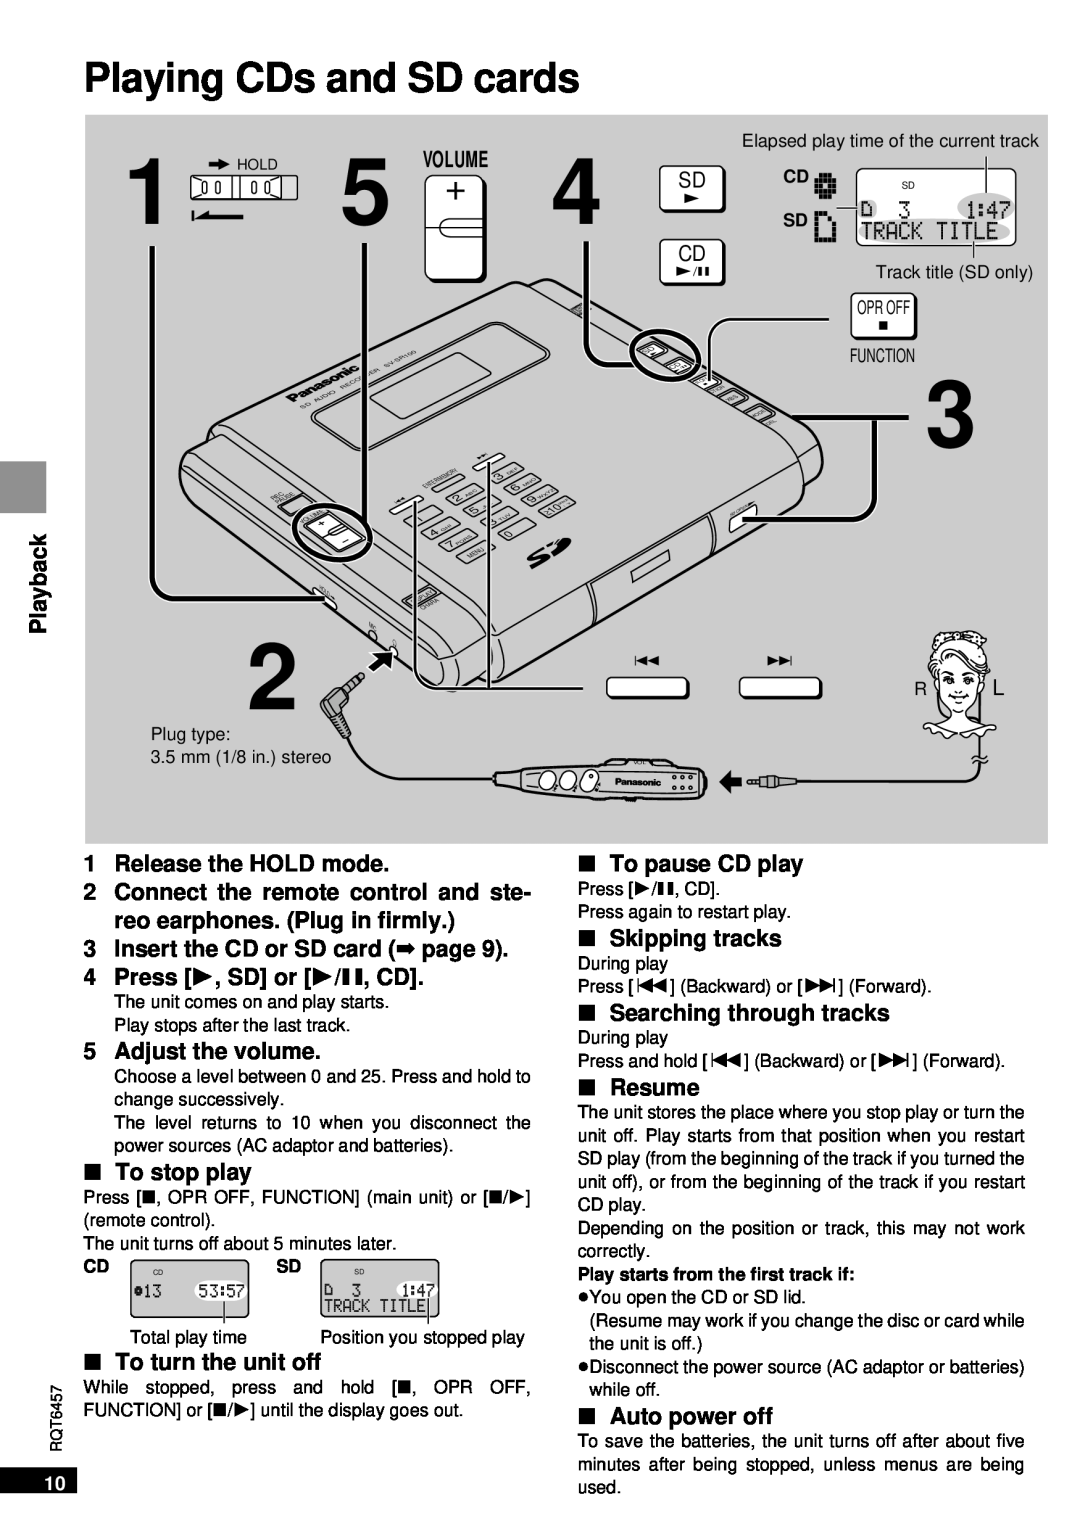 Panasonic SV-SR100 operating instructions Playing CDs and SD cards 